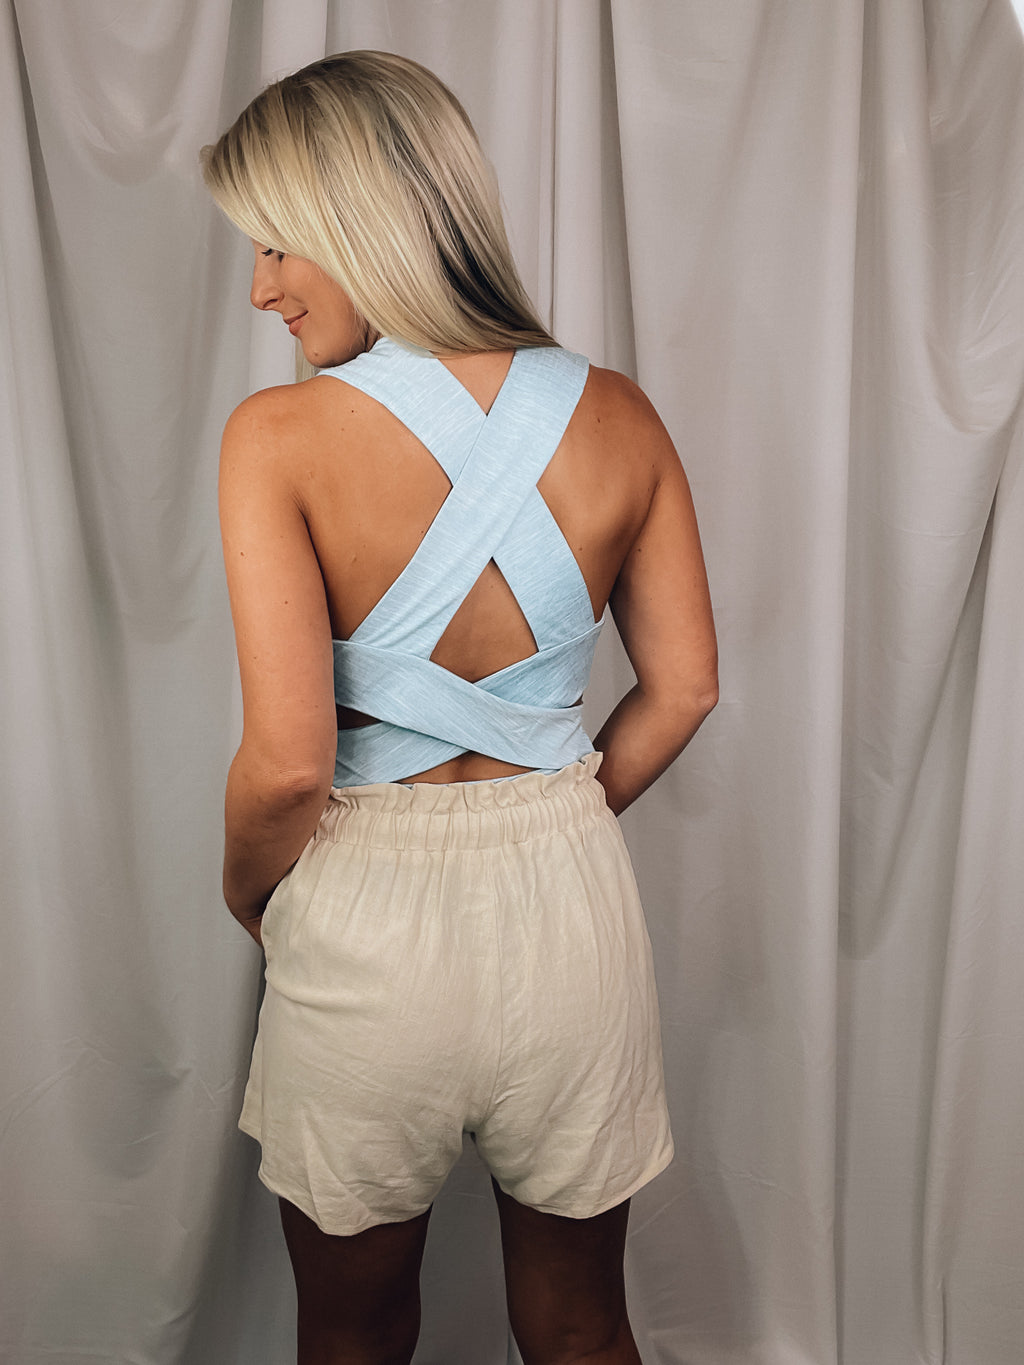 Bodysuit features a heathered light blue color, square neck line, sleeveless detail, cross-open back detail, snap bottom closure, fitted fit and runs true to size! 